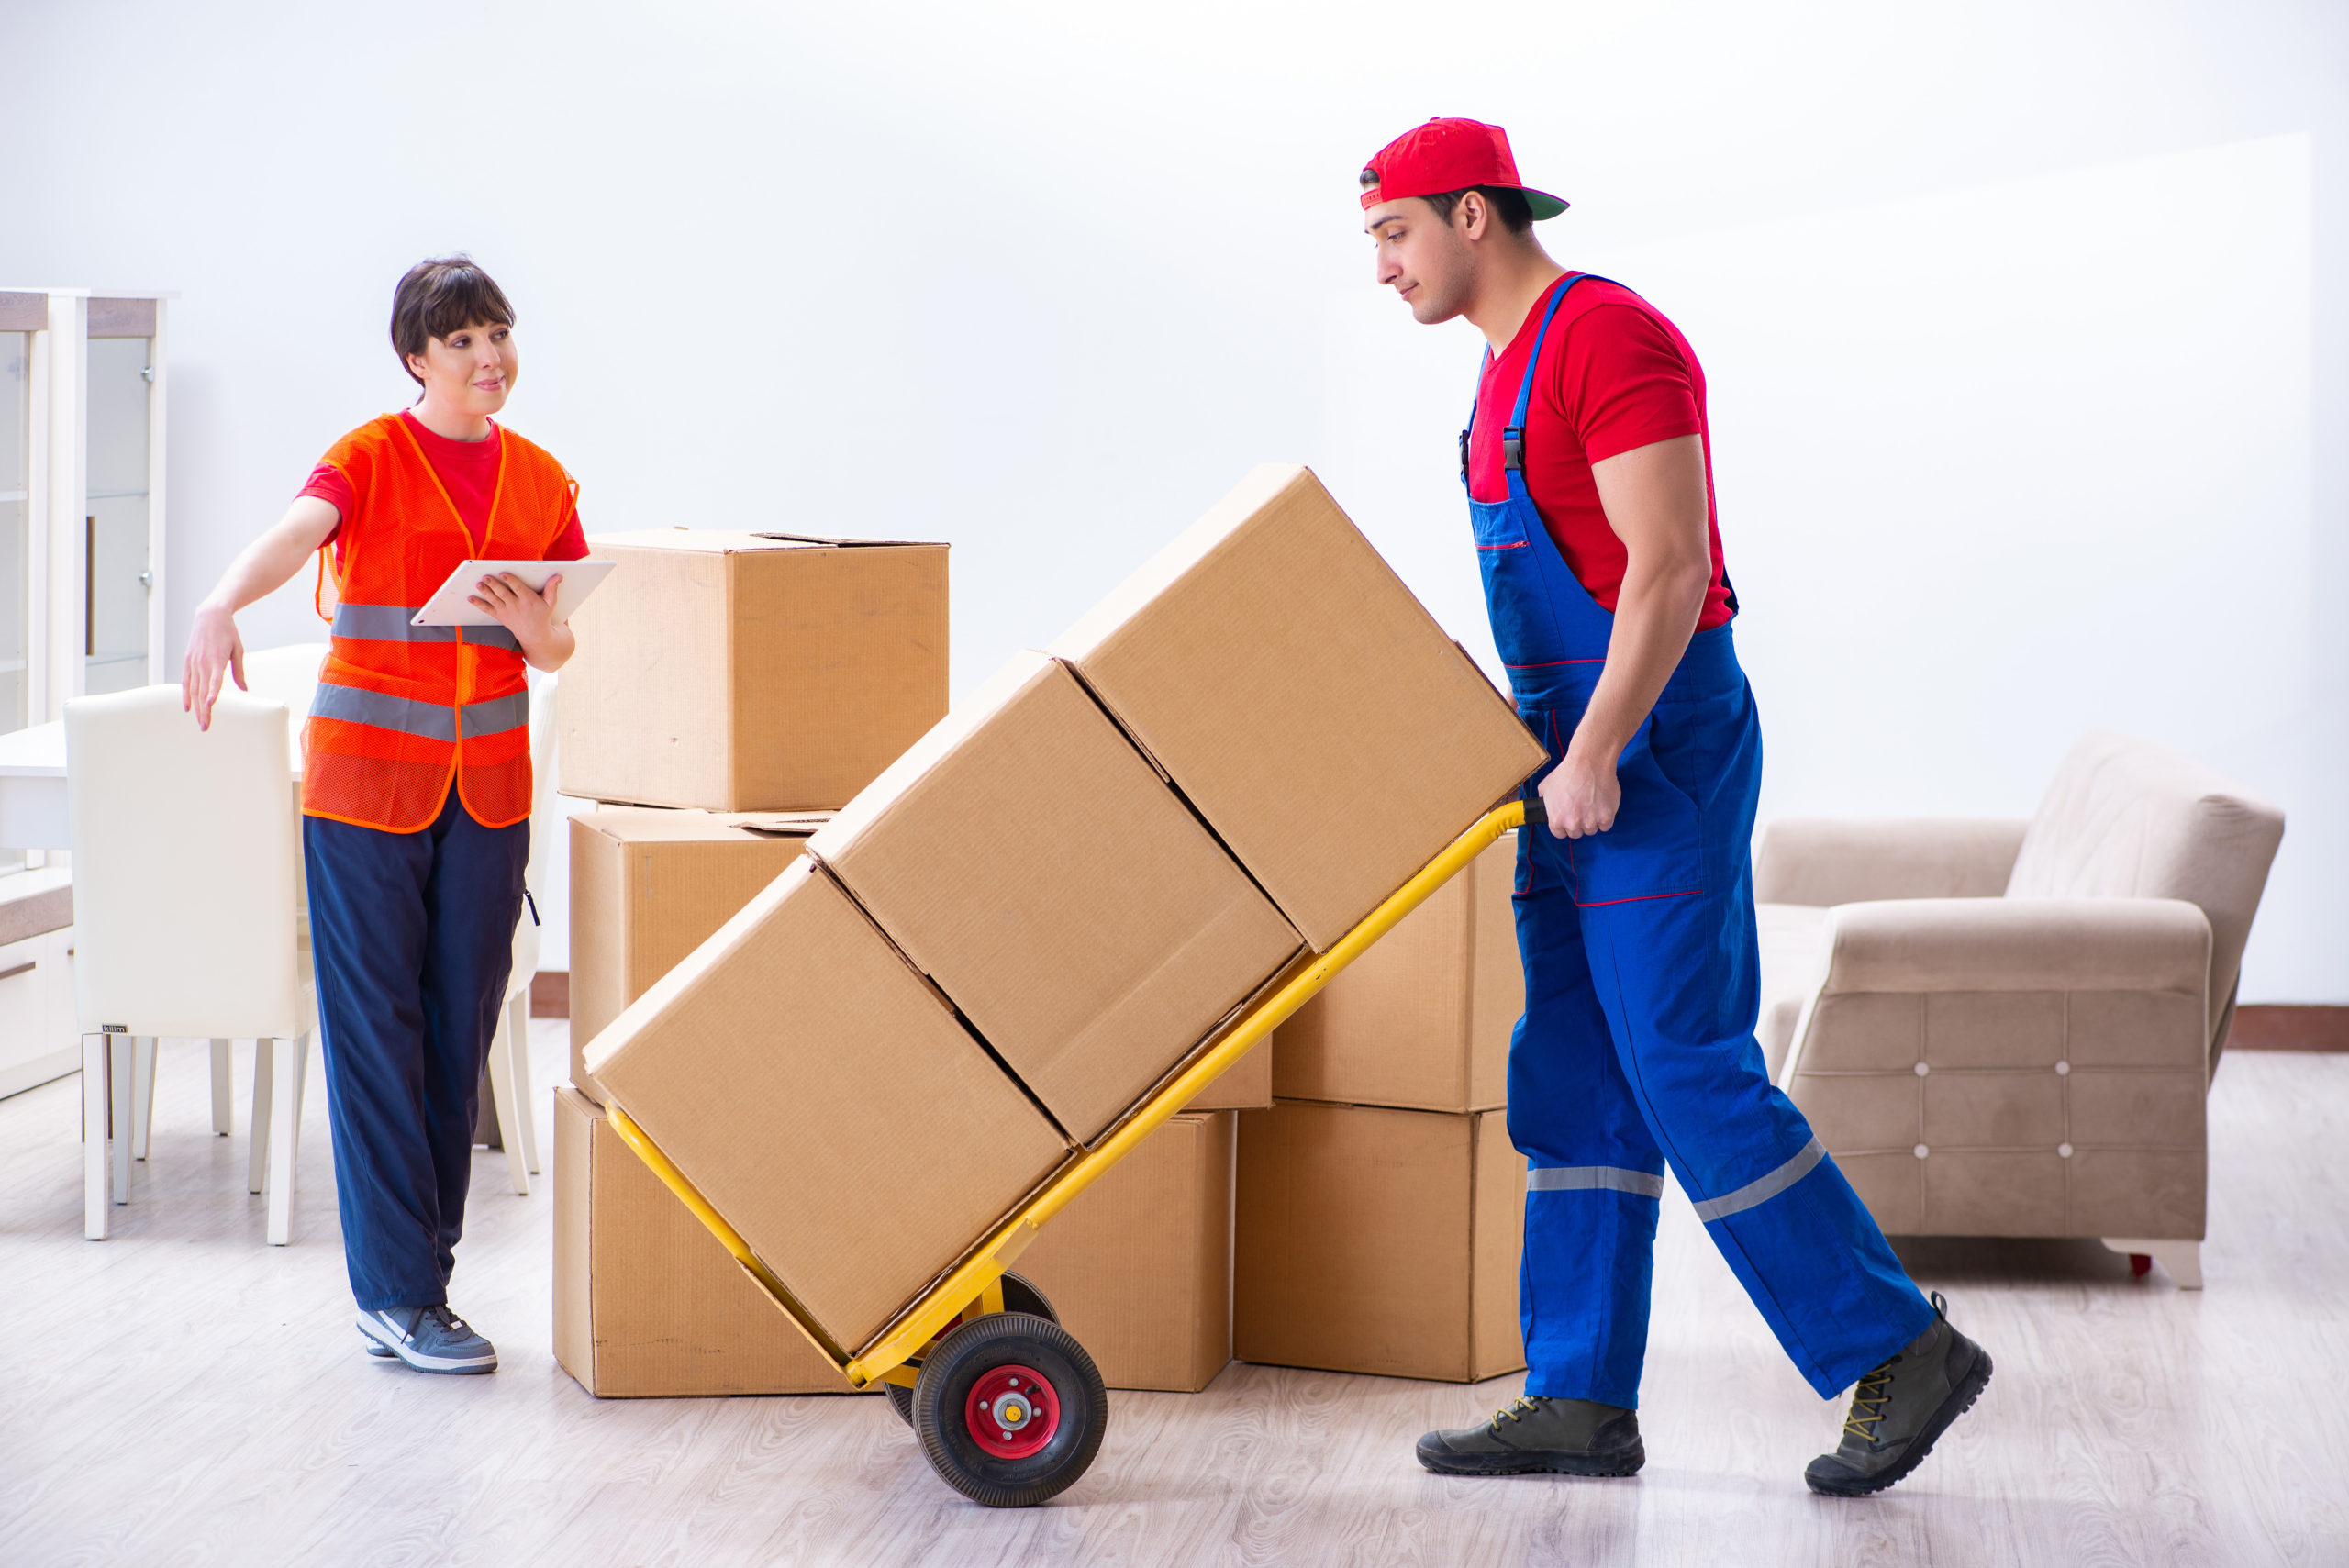 Packers and movers in Karachi